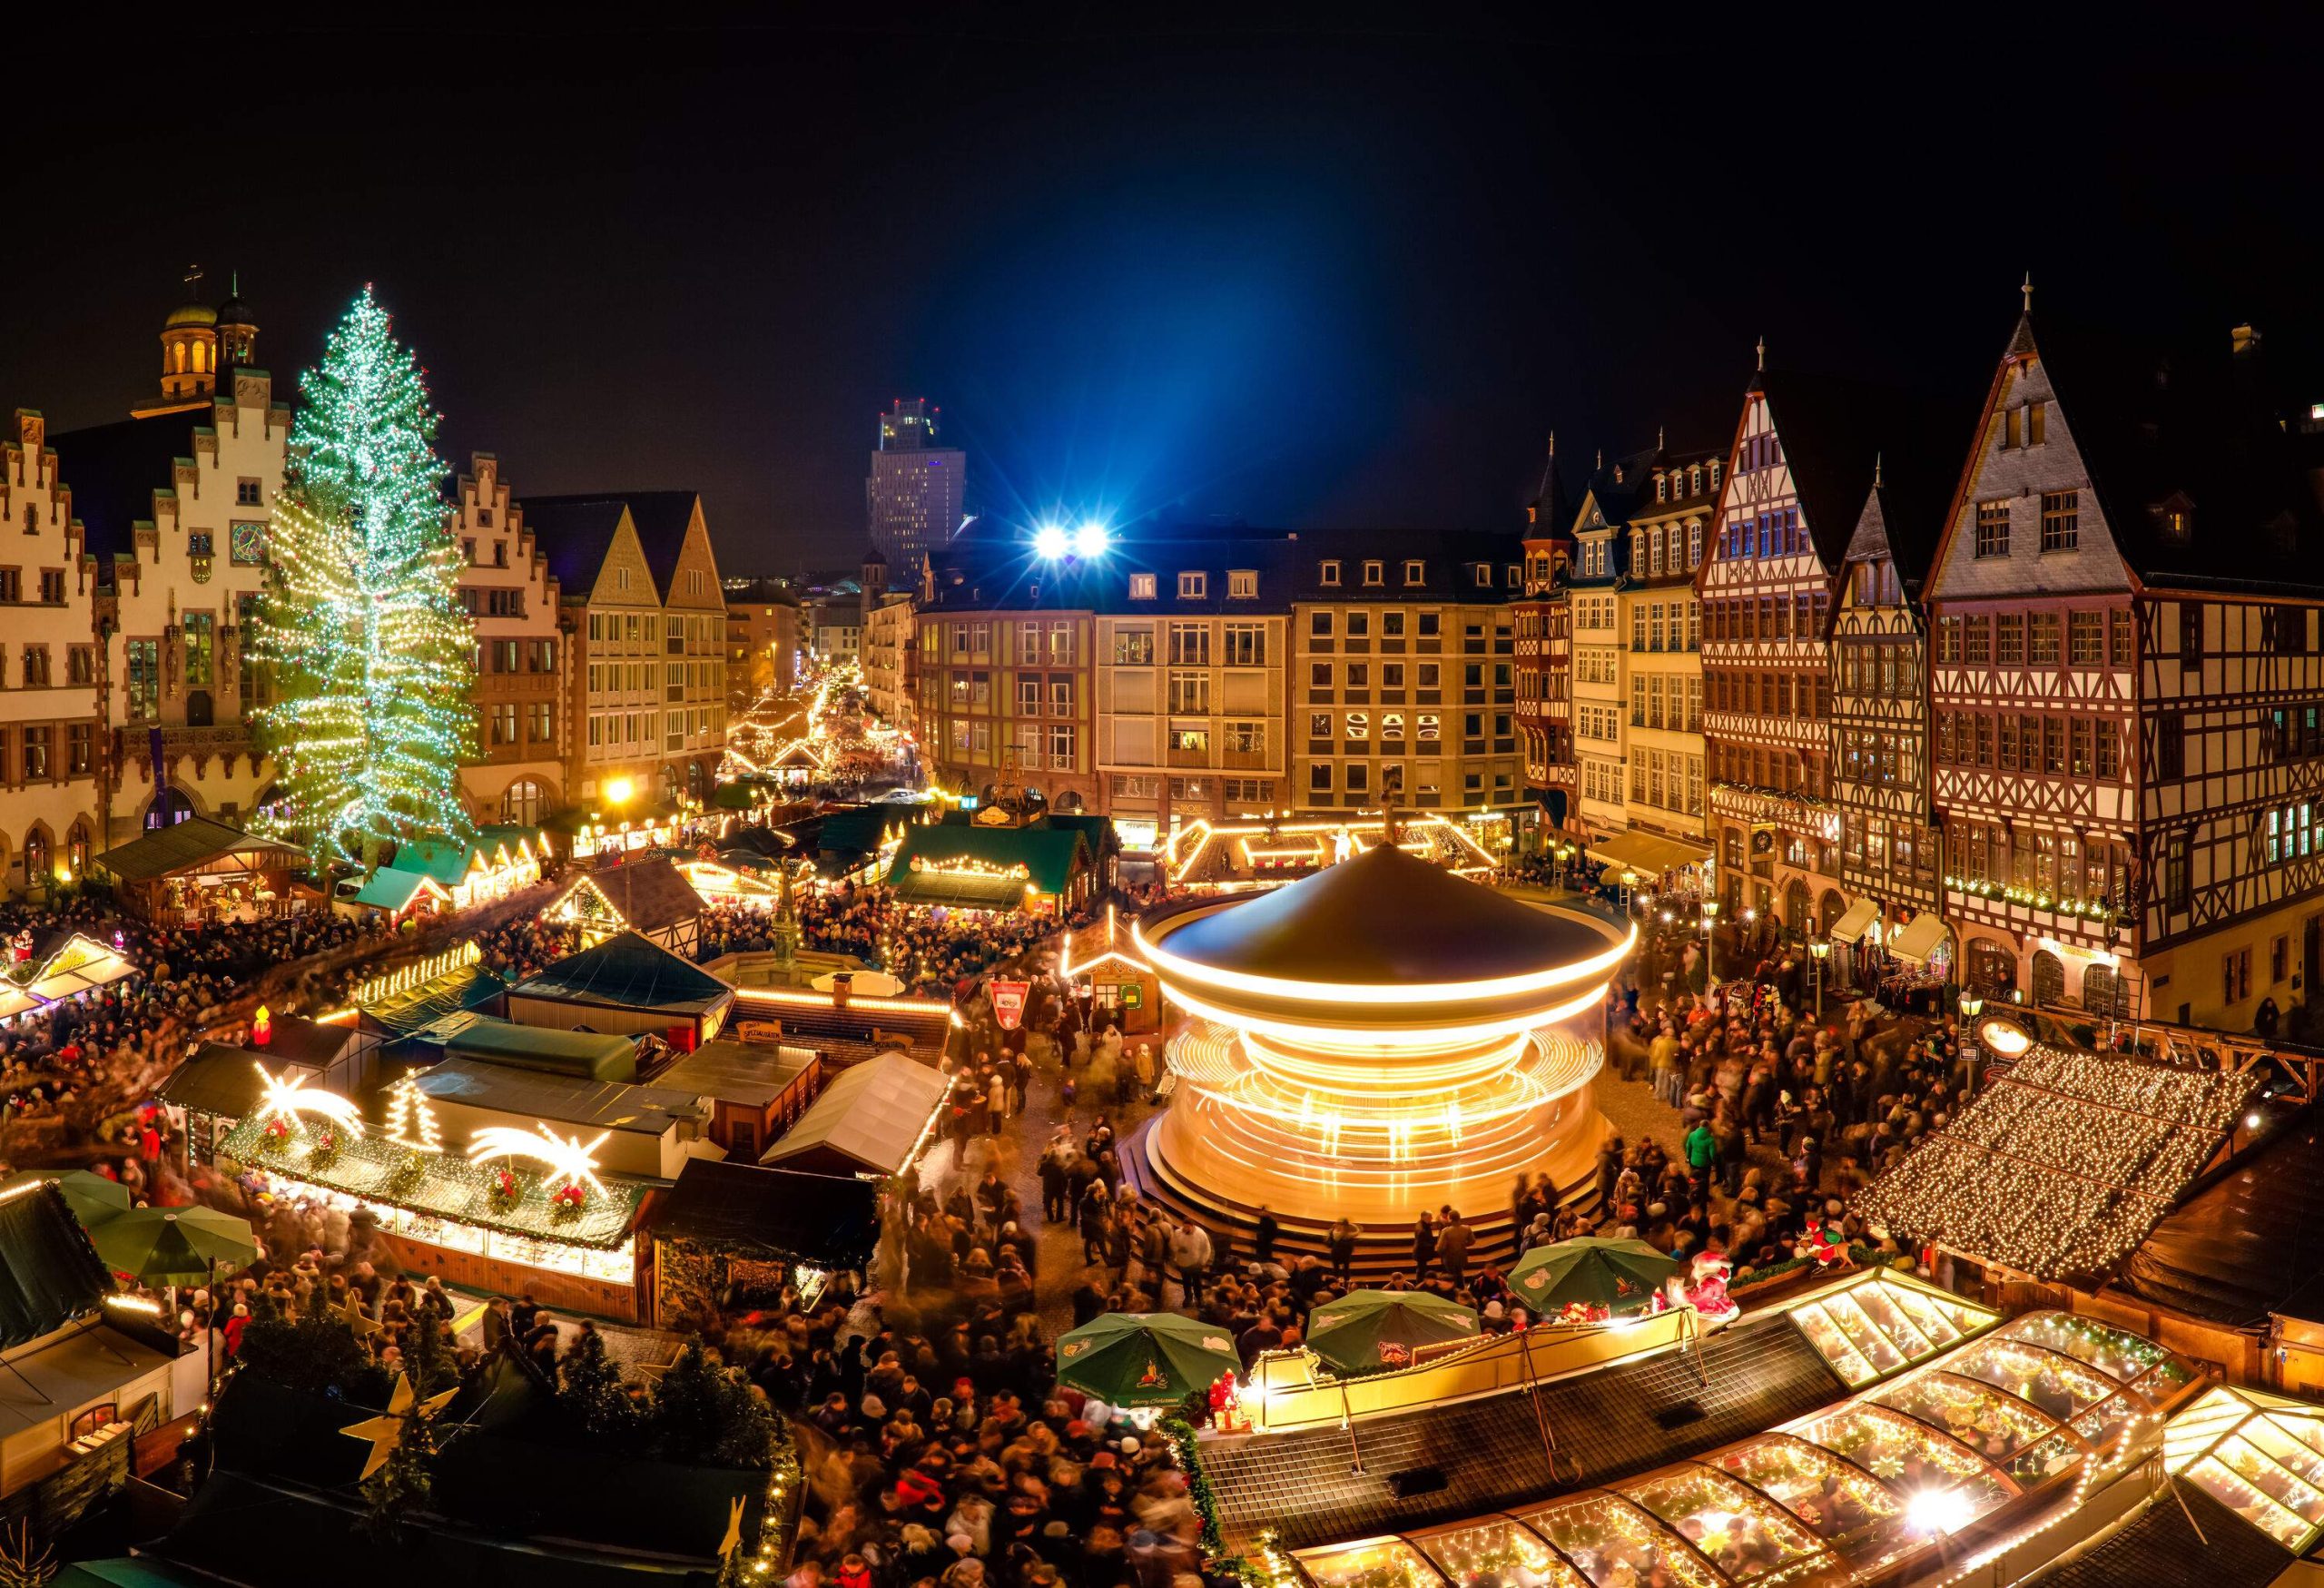 A festive market filled with attractions and shops shimmering in decorative lights.